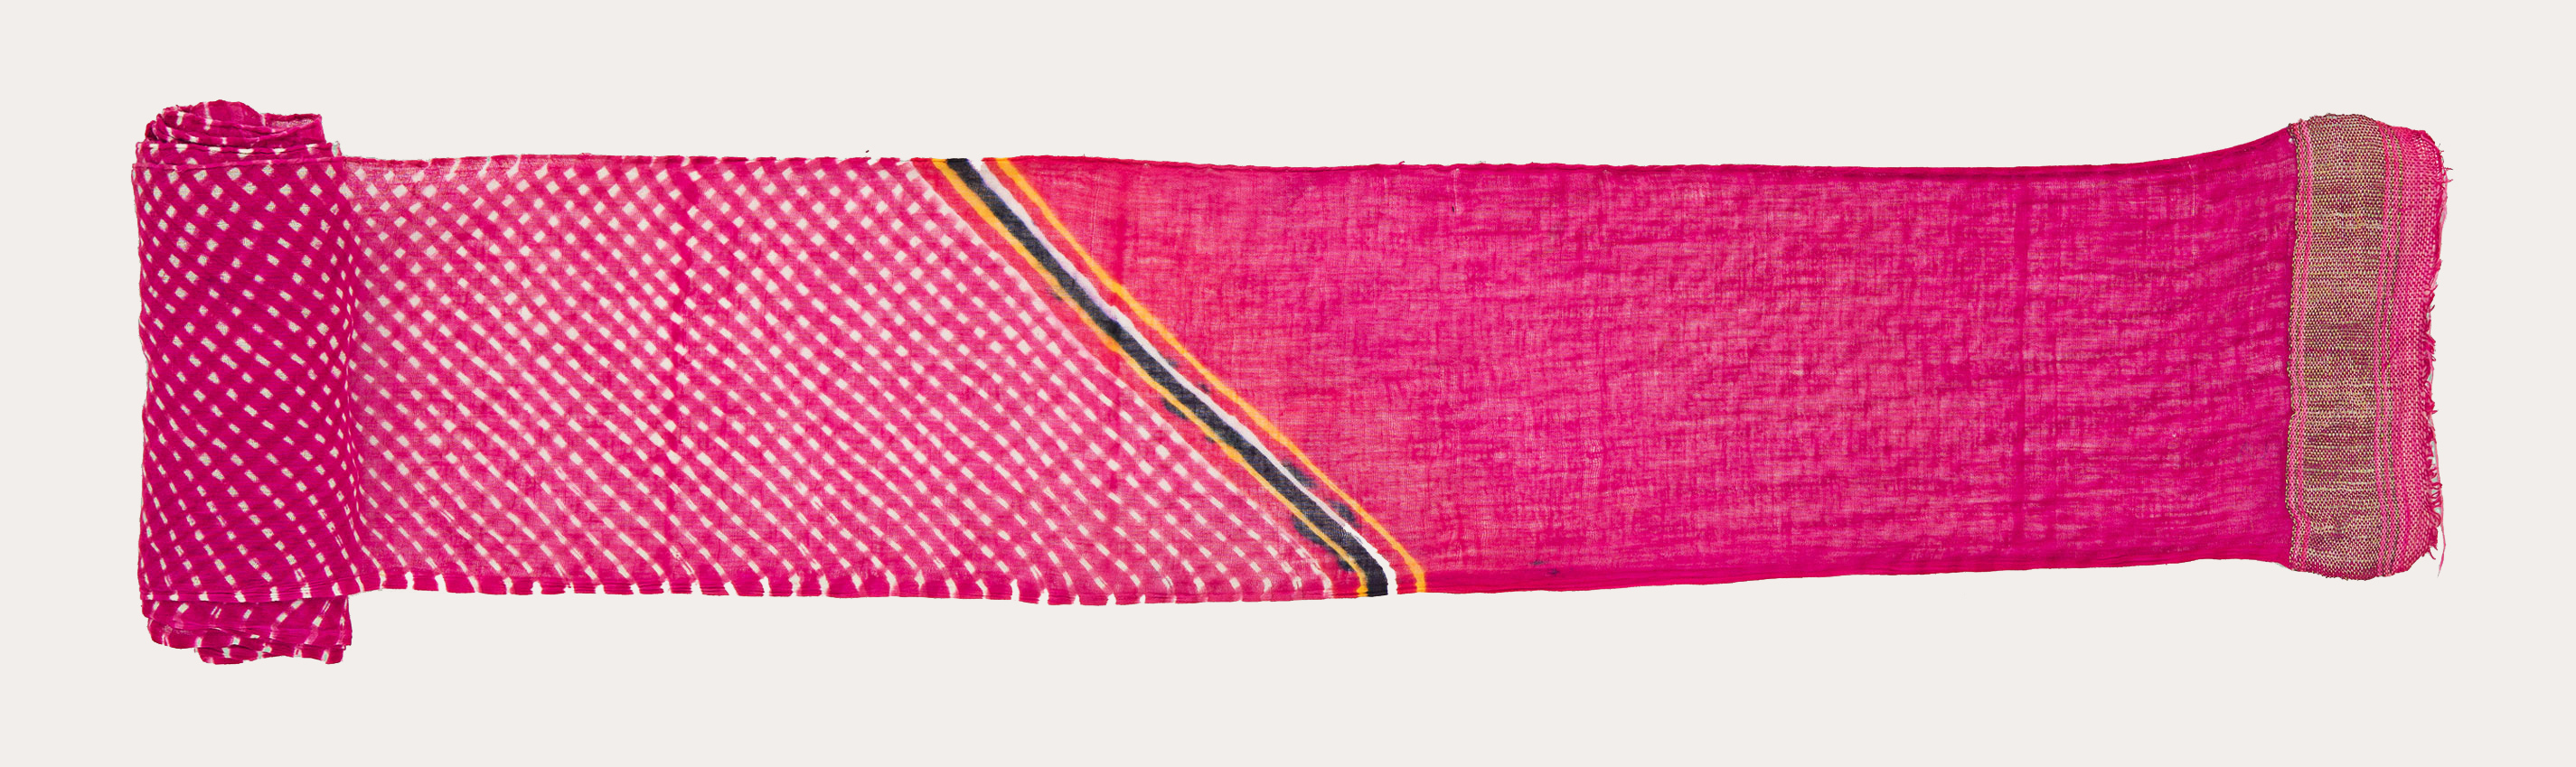 A long piece of rectangular cloth rolled from the right side. The left side is pink with a few bands of diagonal lines before a checkered pattern begins.